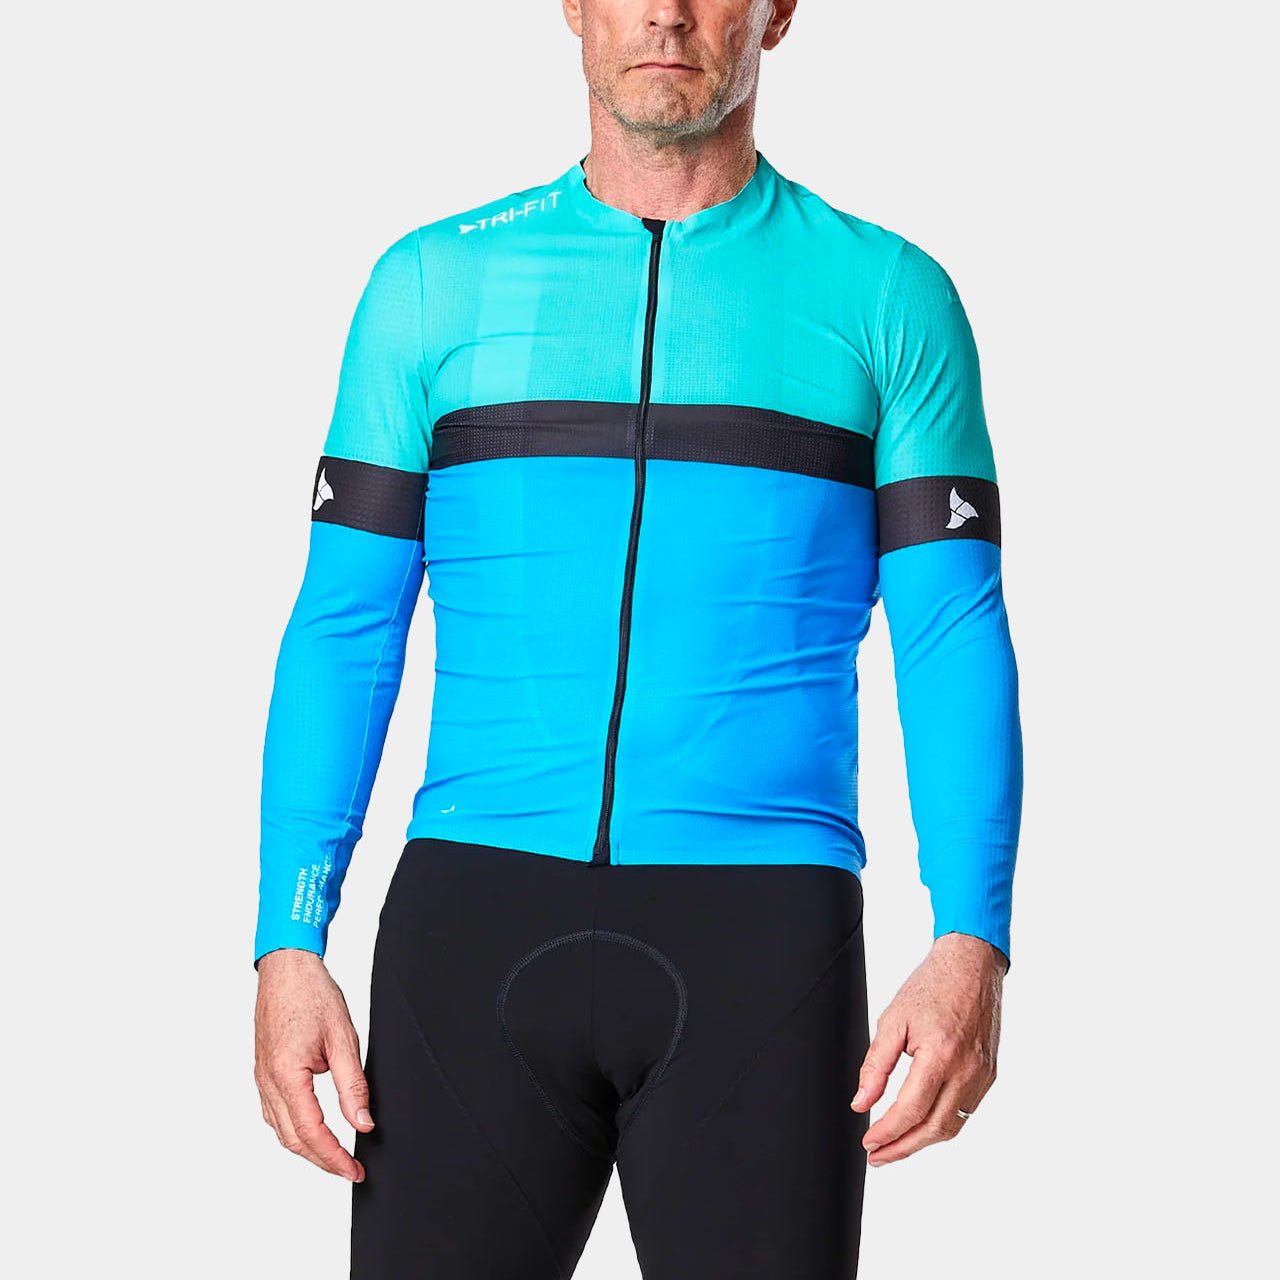 TRI-FIT SYKL PRO long sleeve cycling jersey